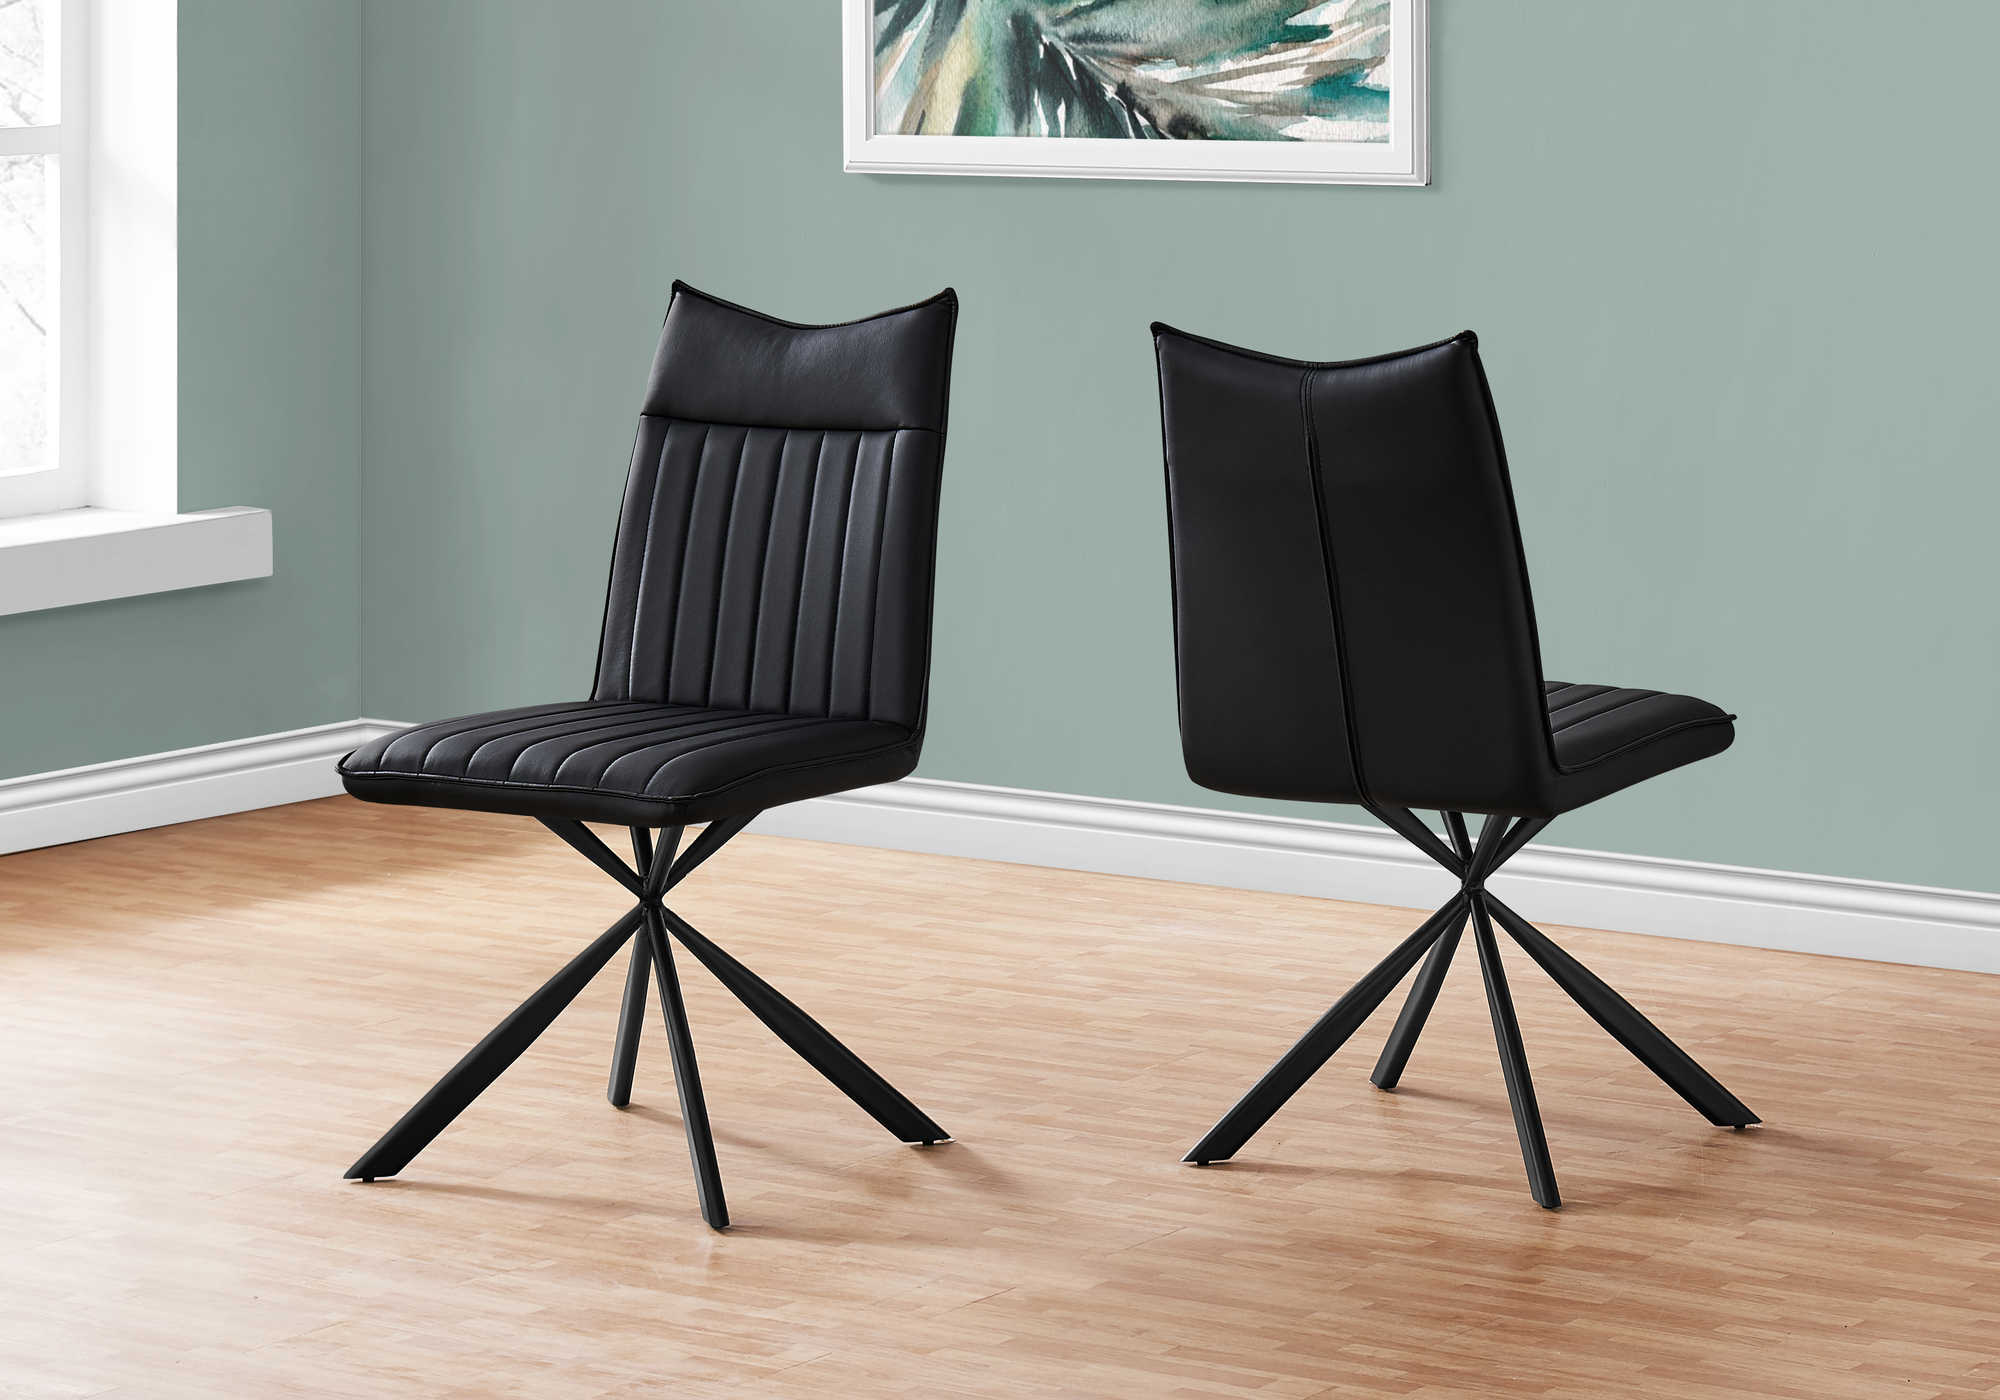 DINING CHAIR - 2PCS / 36"H / BLACK LEATHER-LOOK / BLACK